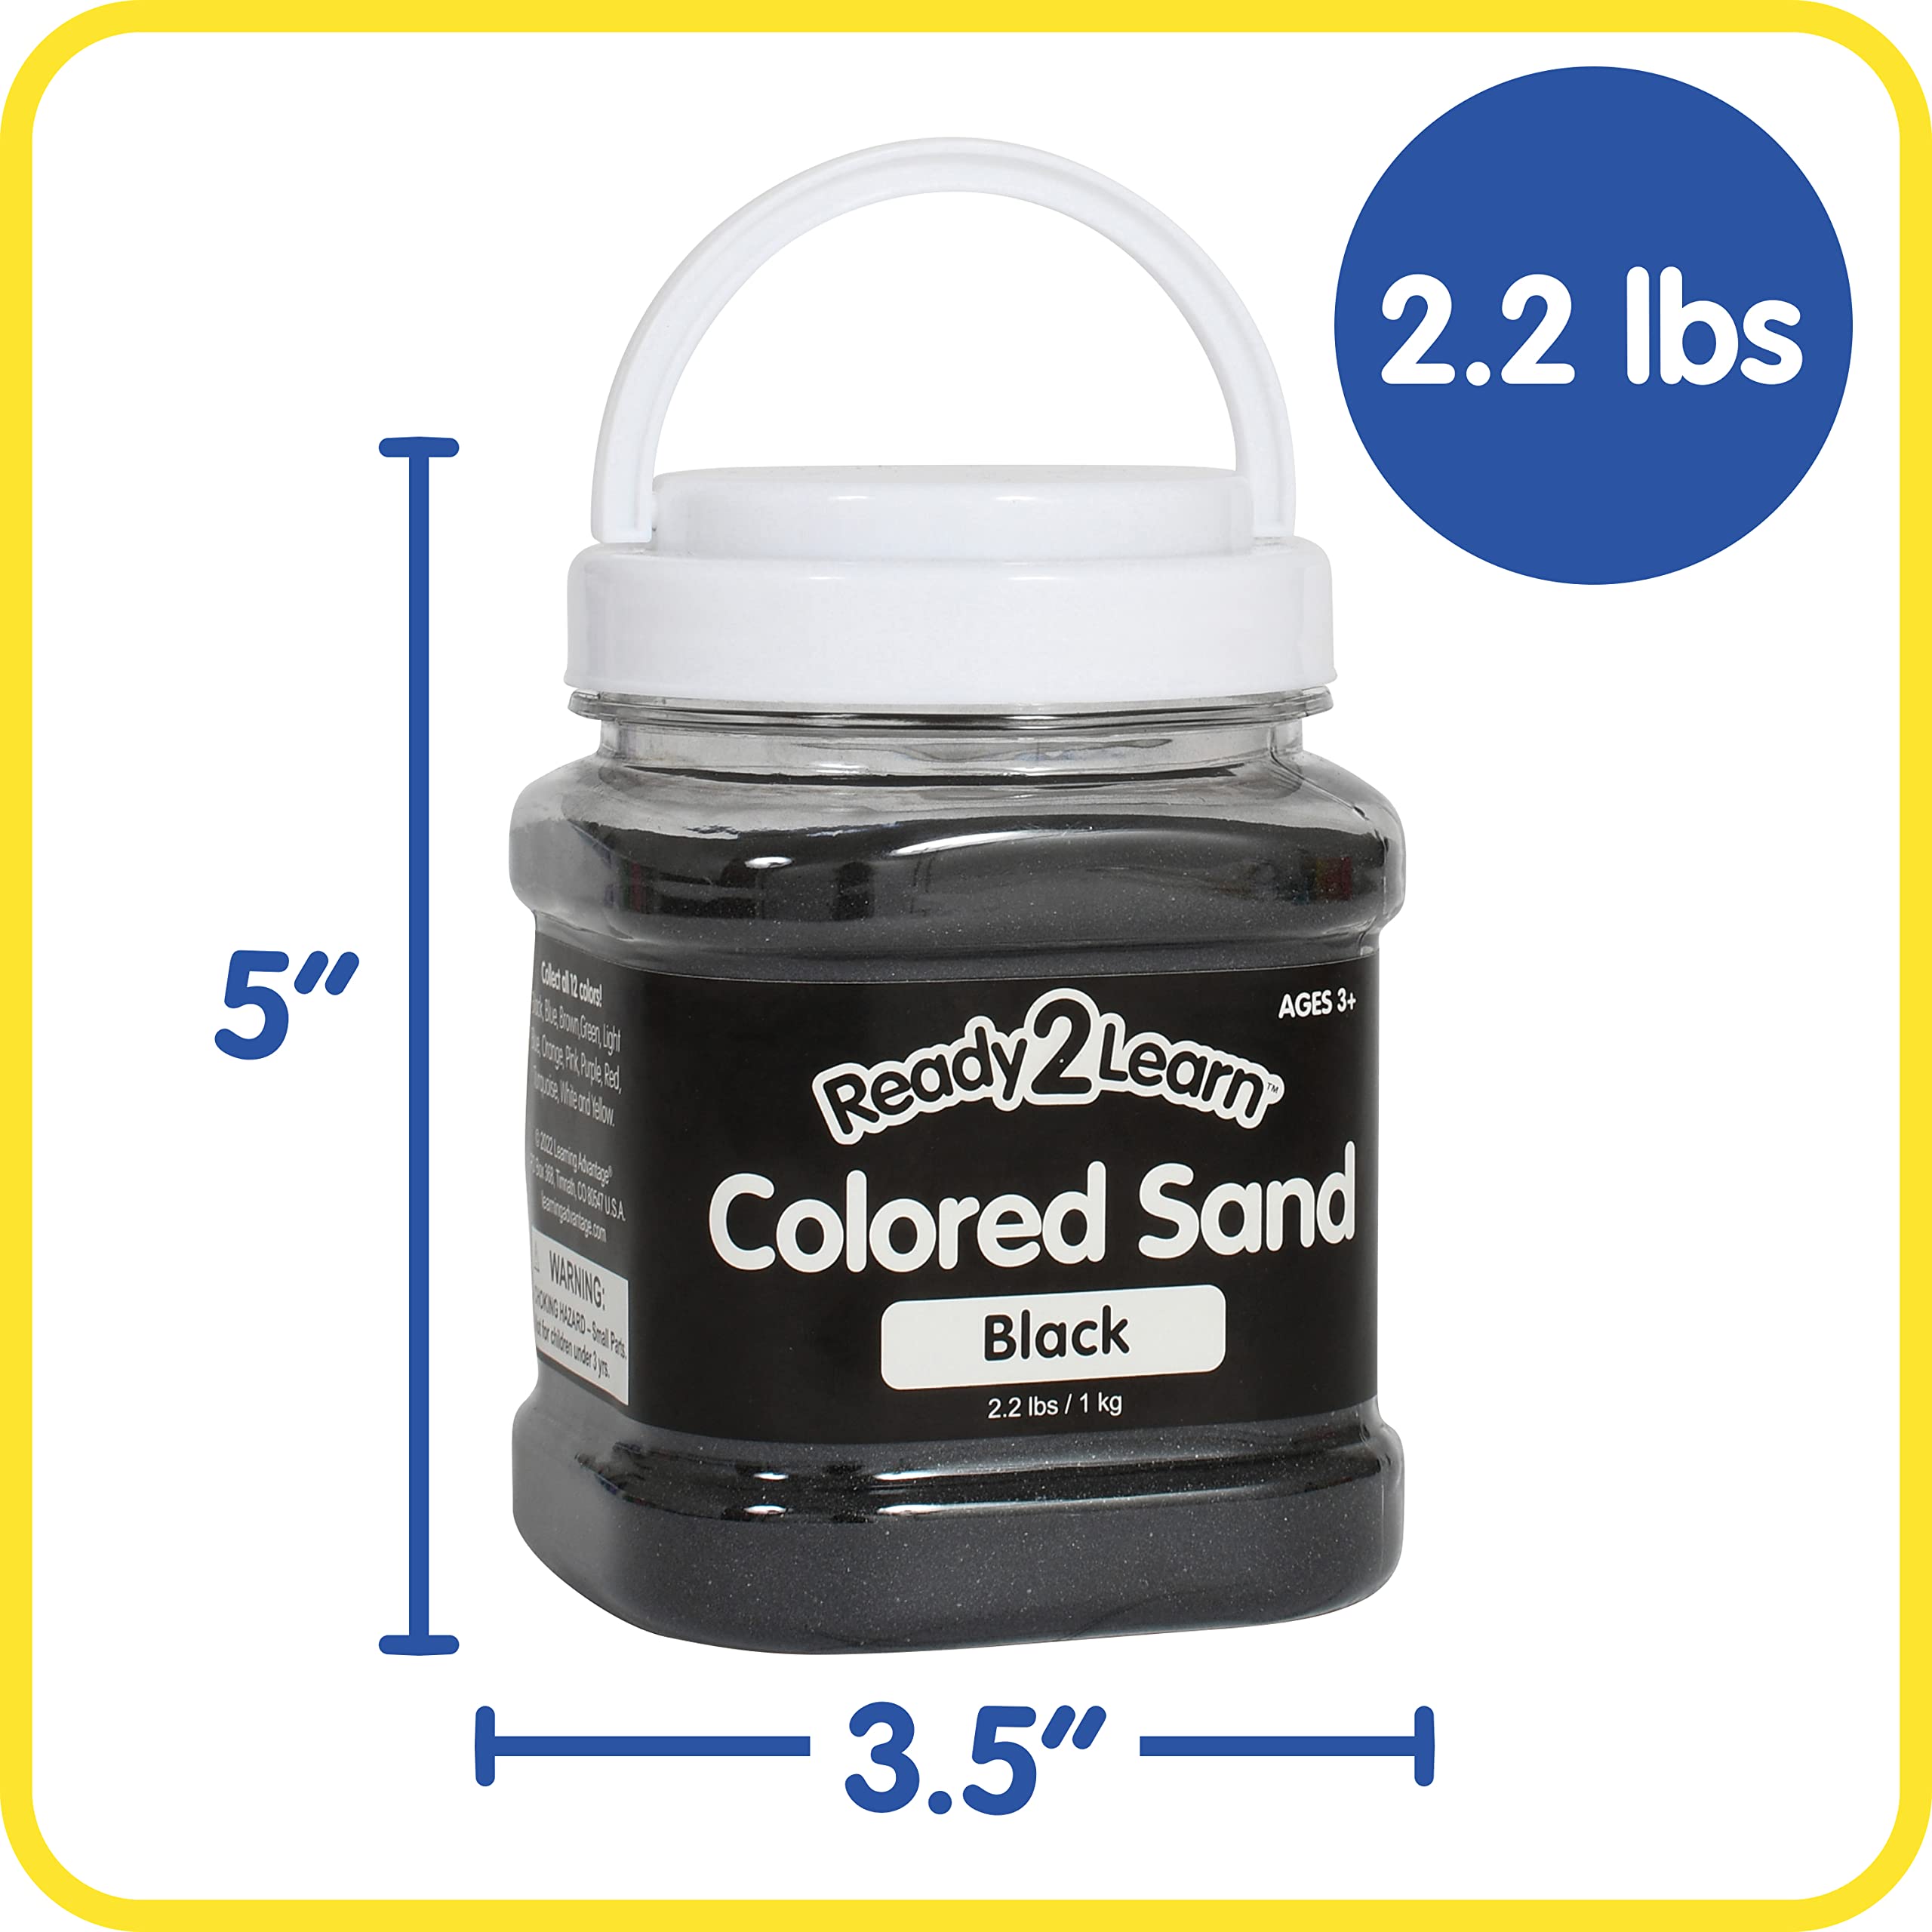 READY 2 LEARN Colored Sand - Black - 2.2 lbs - Play Sand for Kids - Perfect for Wedding Unity Ceremonies, Crafts, Sensory Bins and Vase Filler